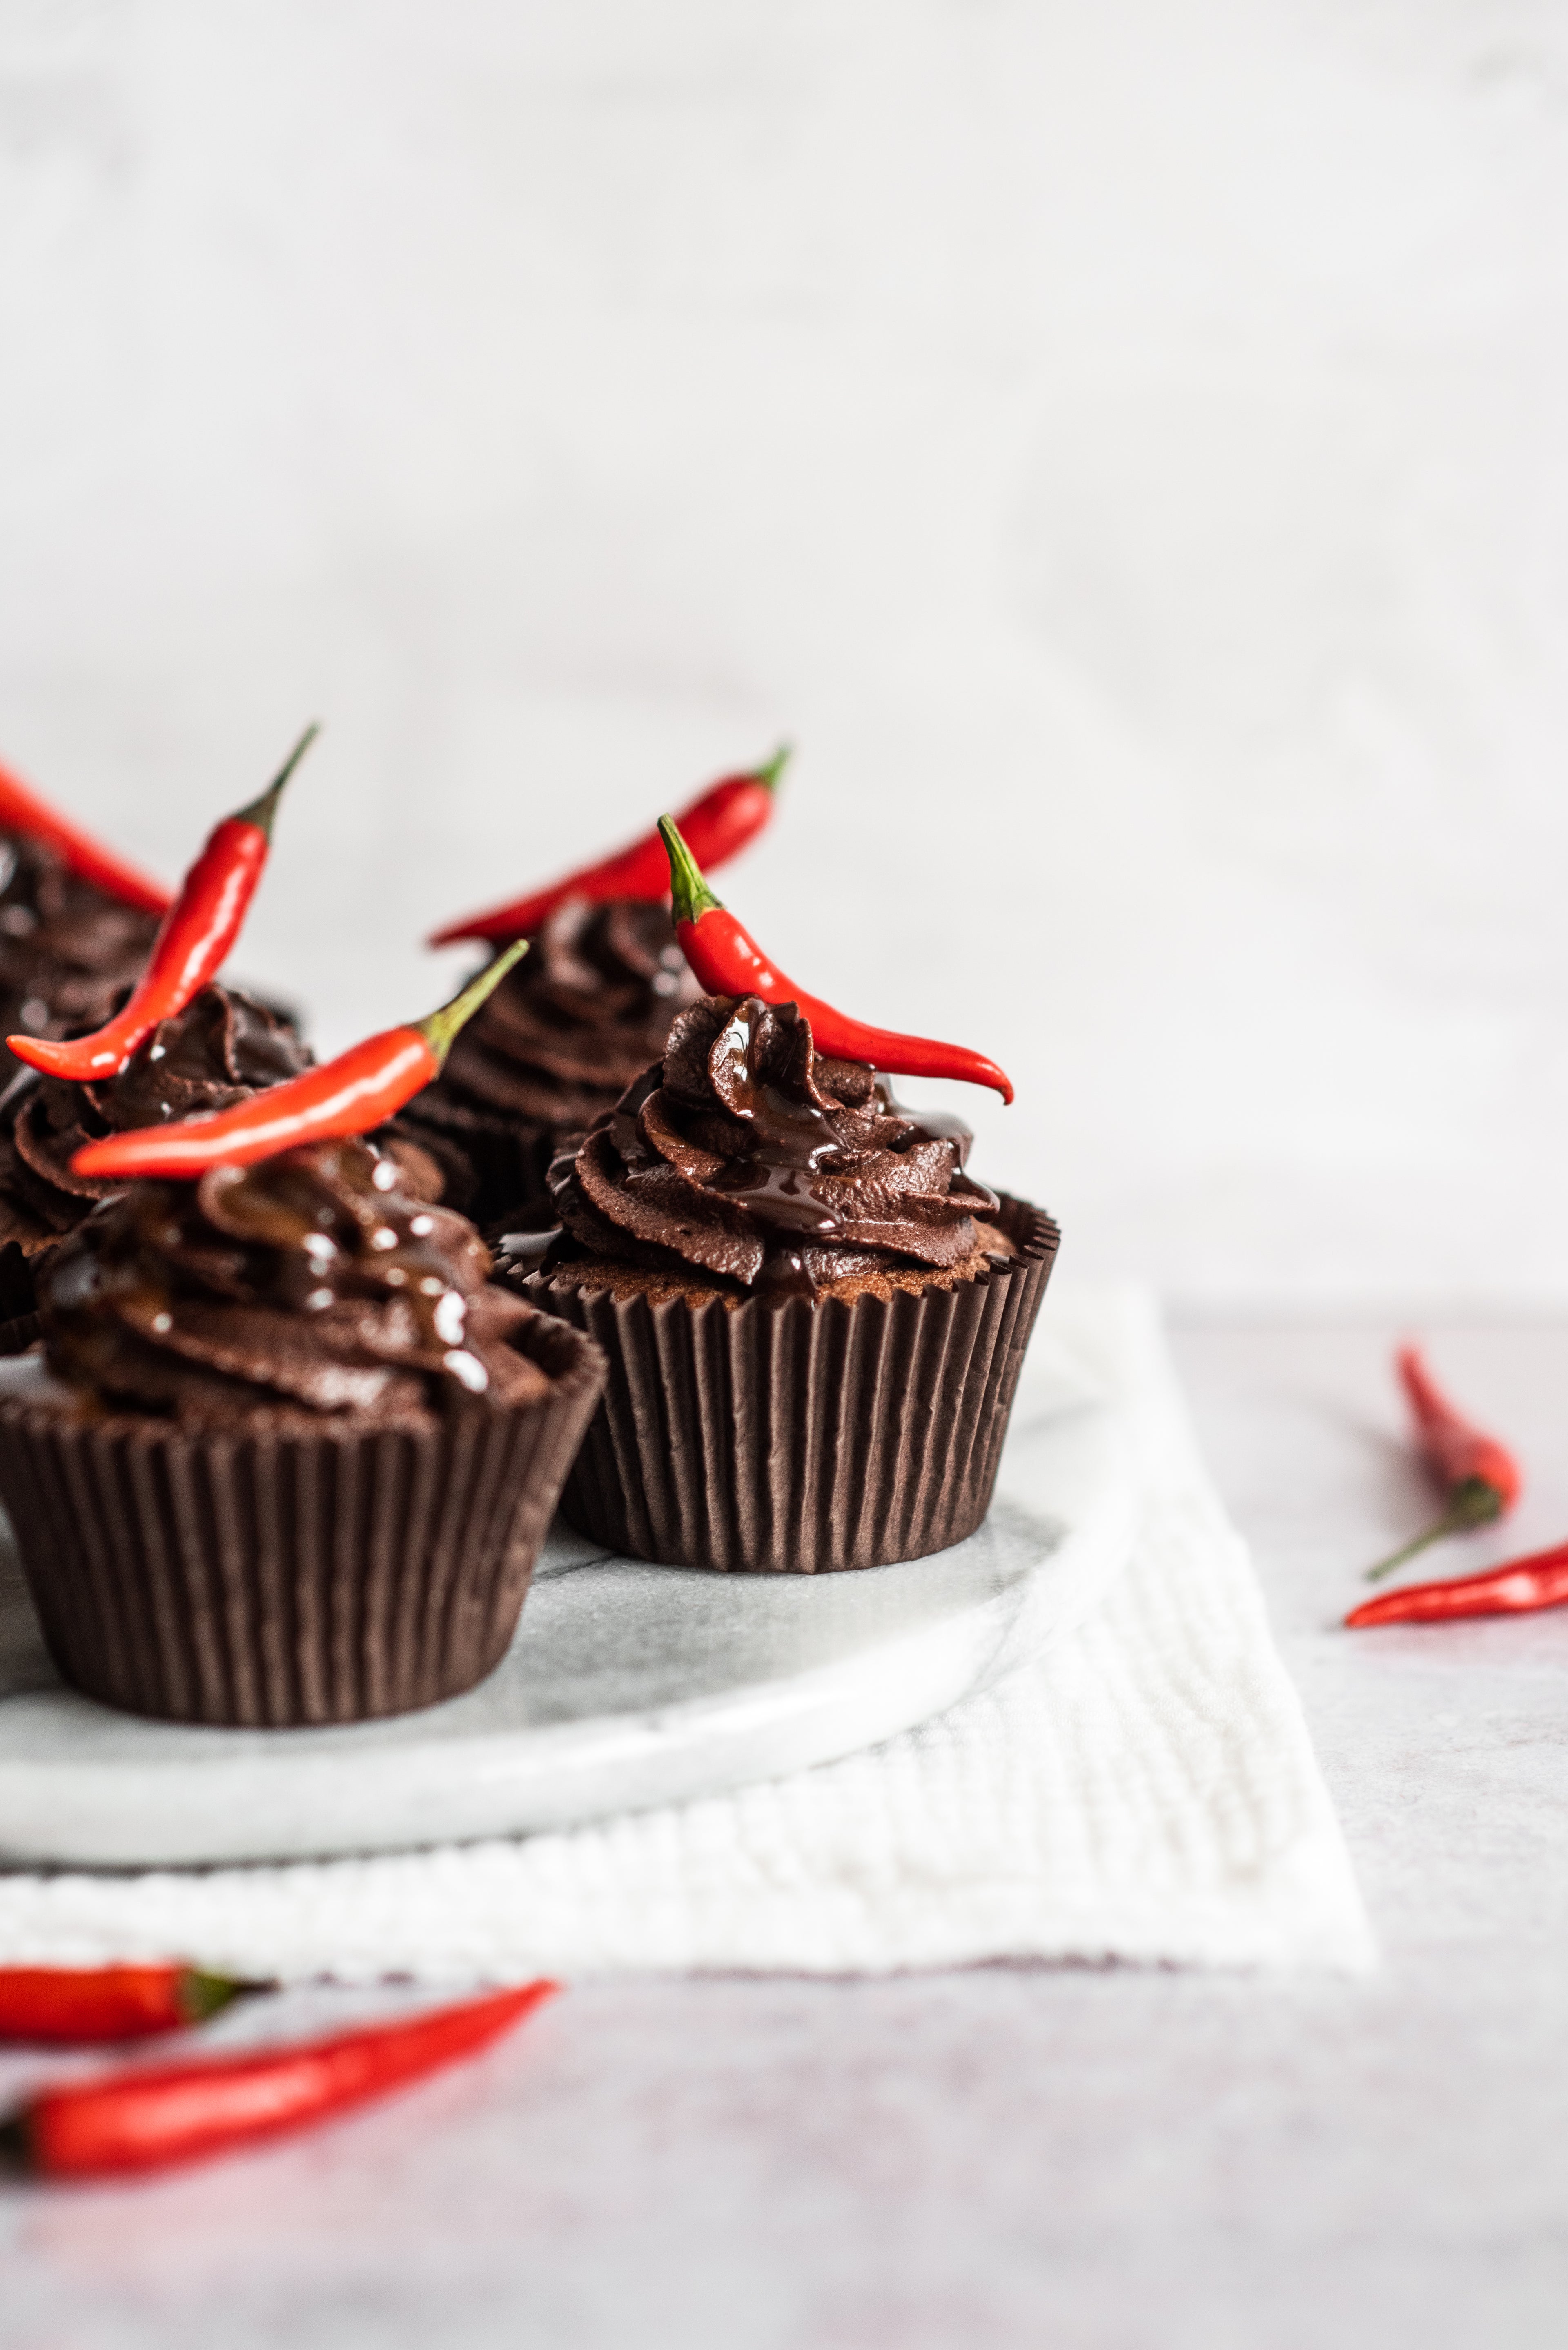 Chilli Chocolate Cupcakes with a chilli on top